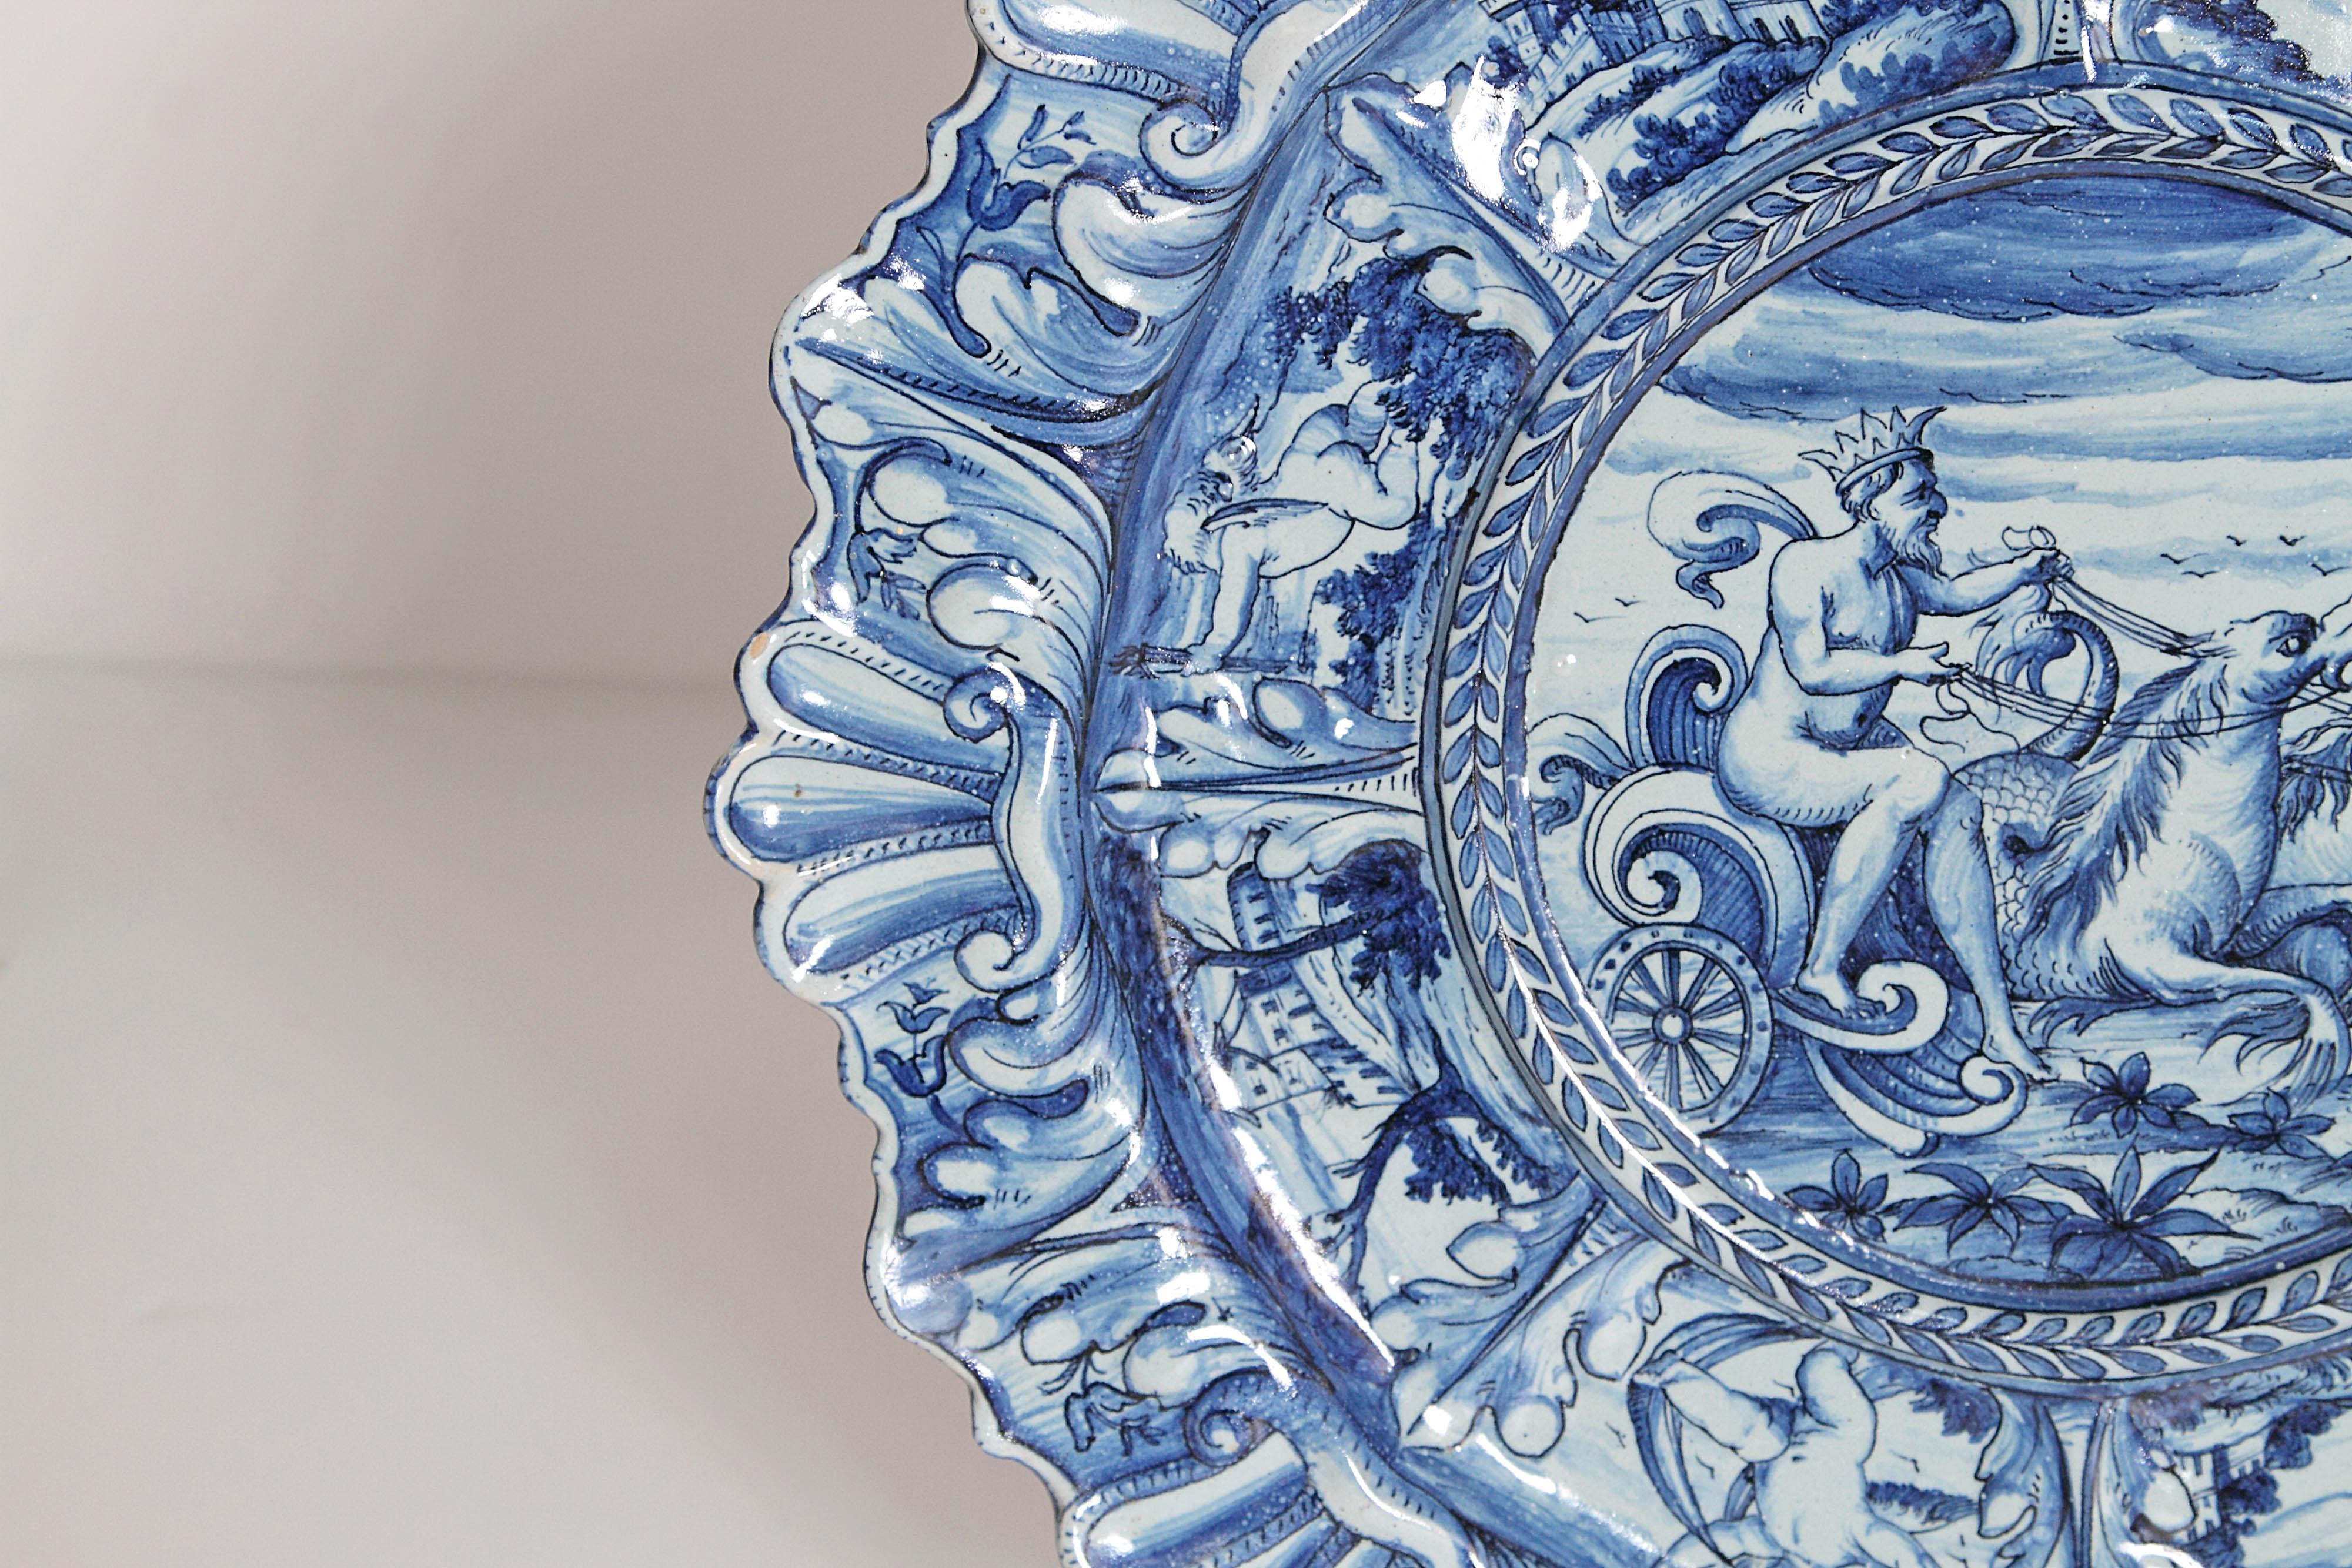 Glazed Mid-19th Century Blue and White Delft Italian Charger